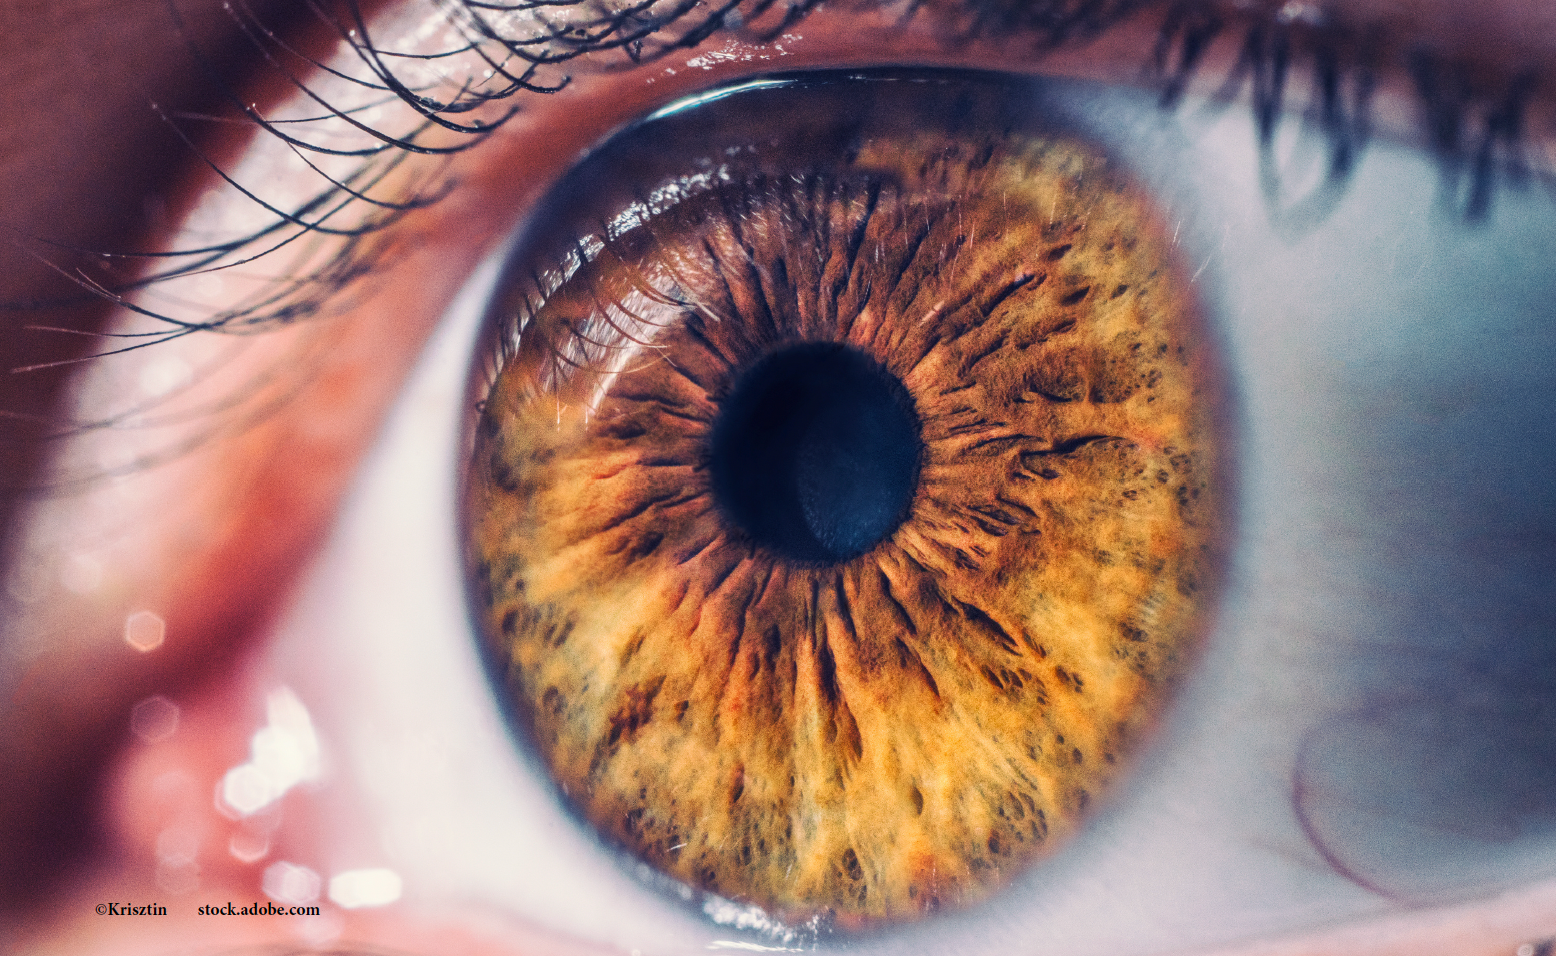 New research out of the National Eye Institute (NEI) confirms that dietary supplements can decrease the progression of age-related macular degeneration (AMD). Image Credit: ©Krisztin - stock.adobe.com